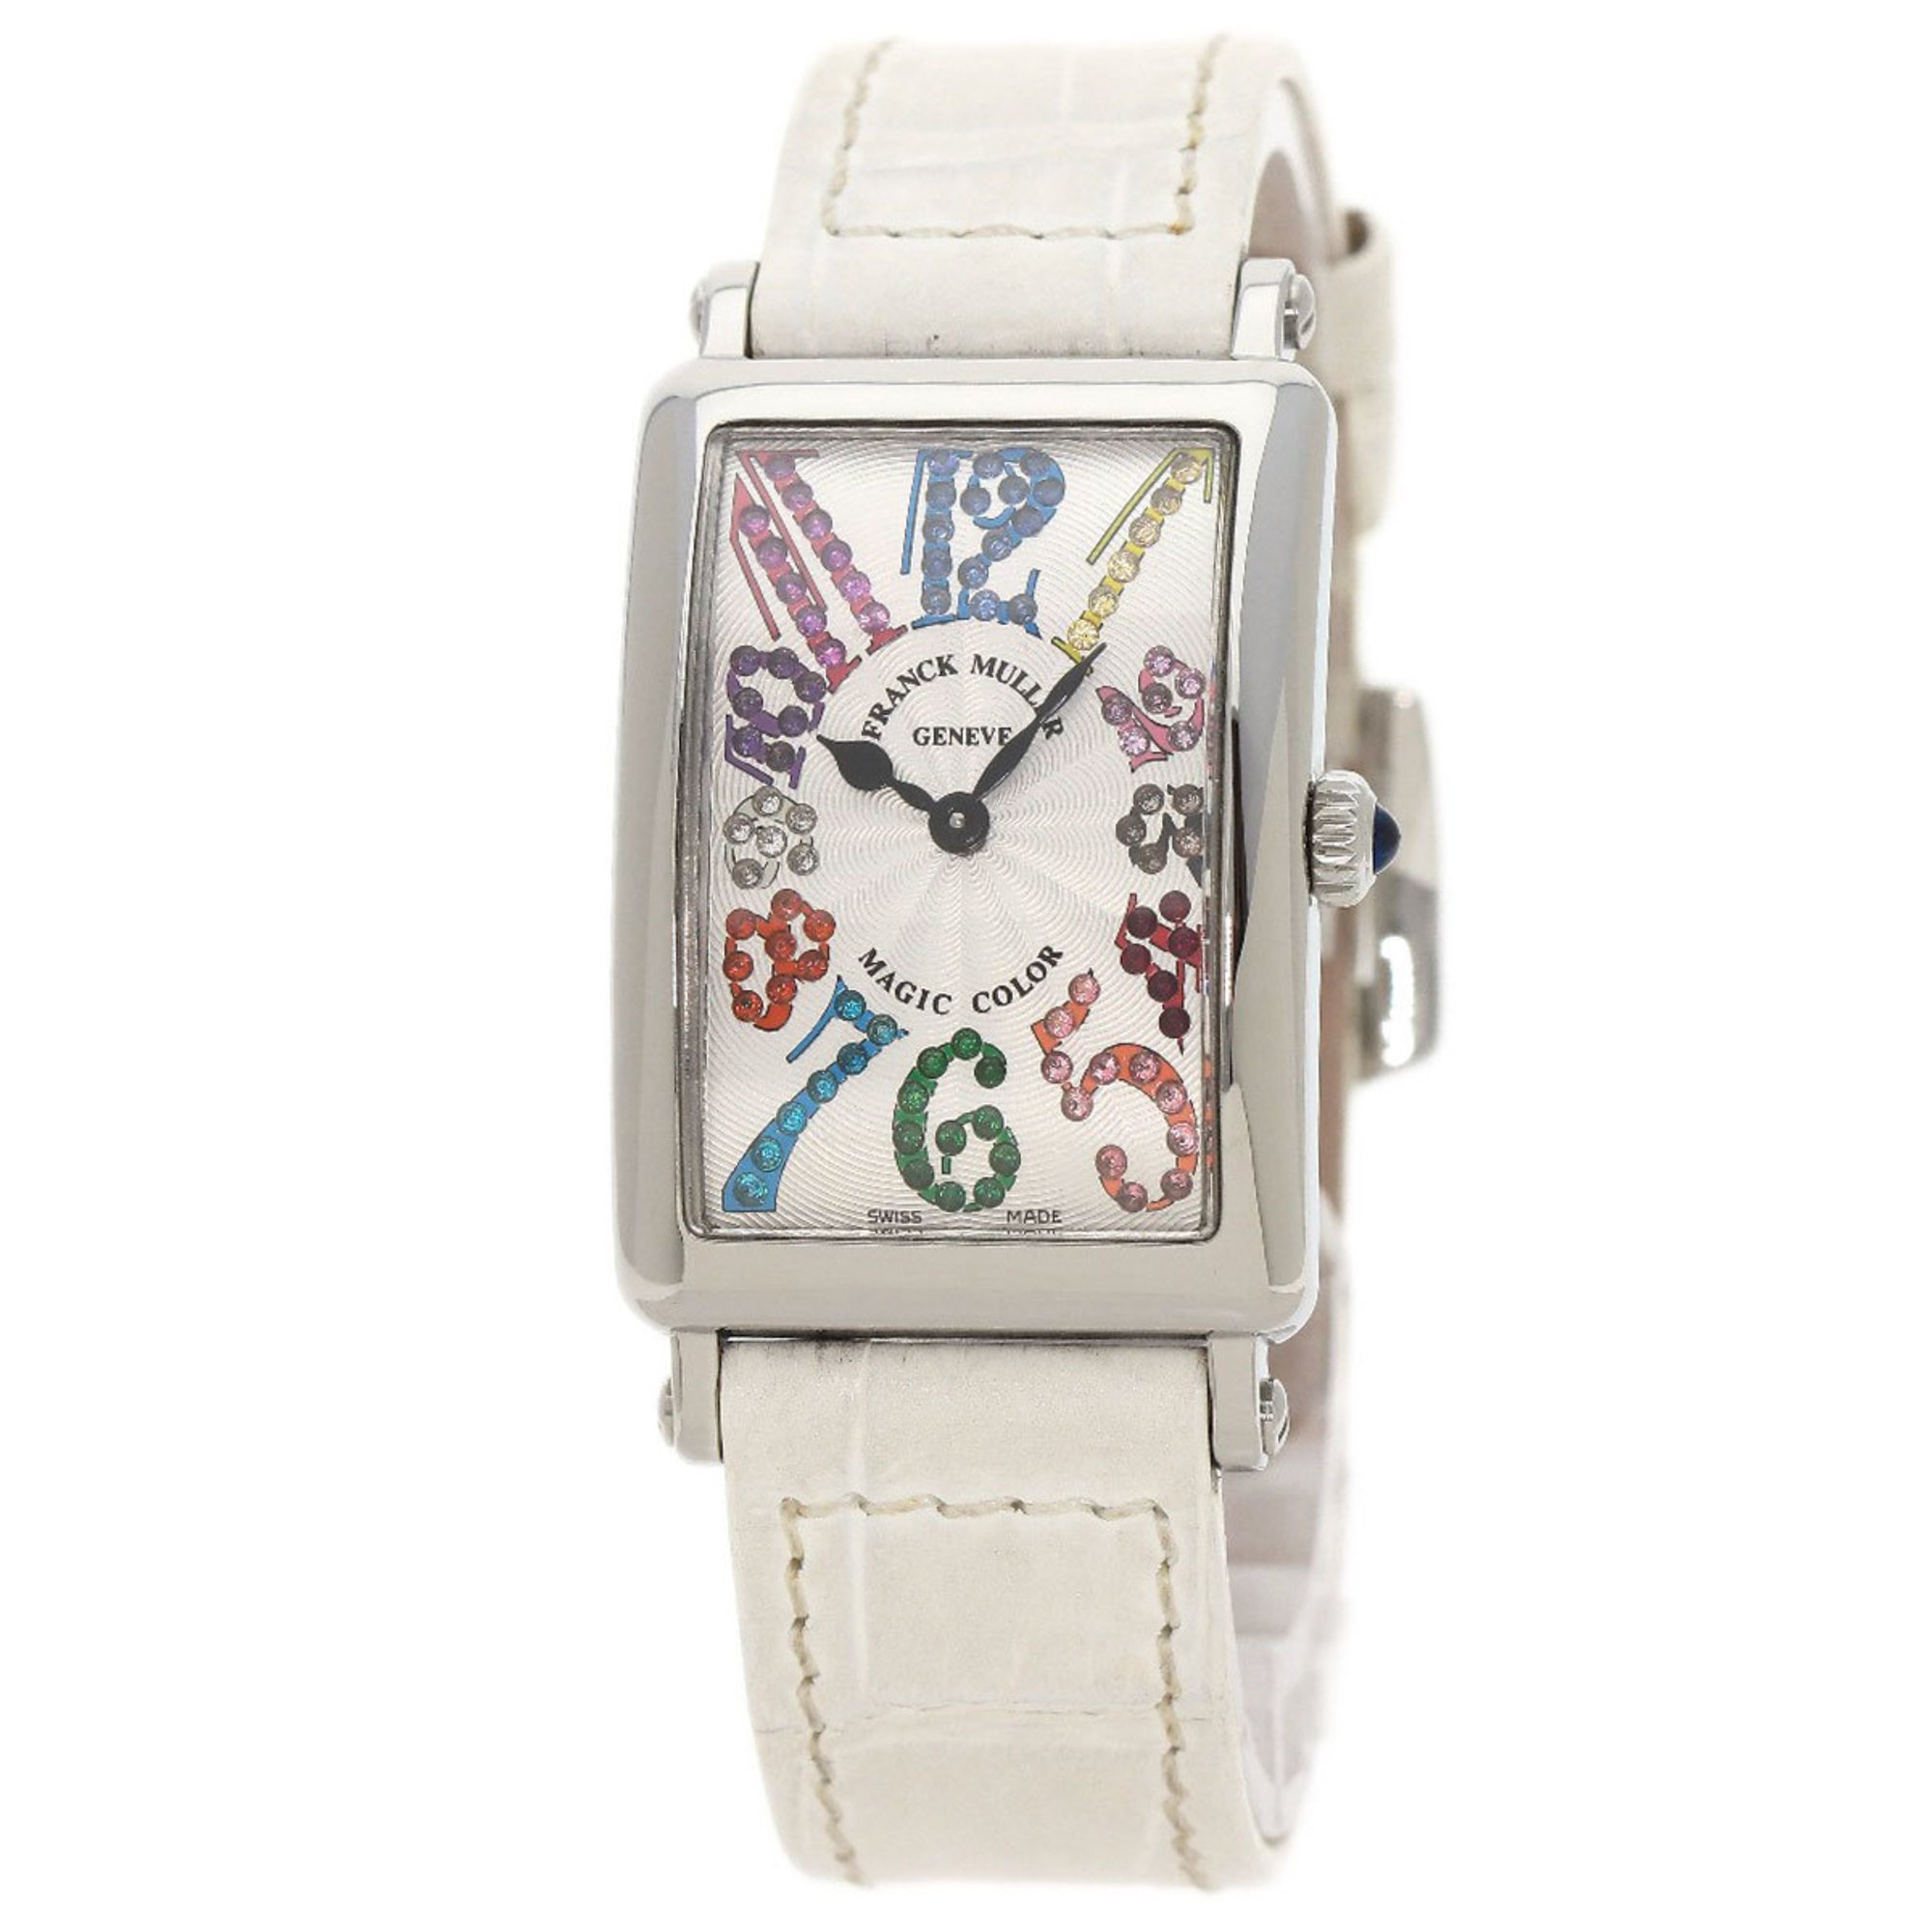 Franck Muller 902MAGCOL Long Island Magic Color Watch Stainless Steel/Leather Ladies FRANCK MULLER